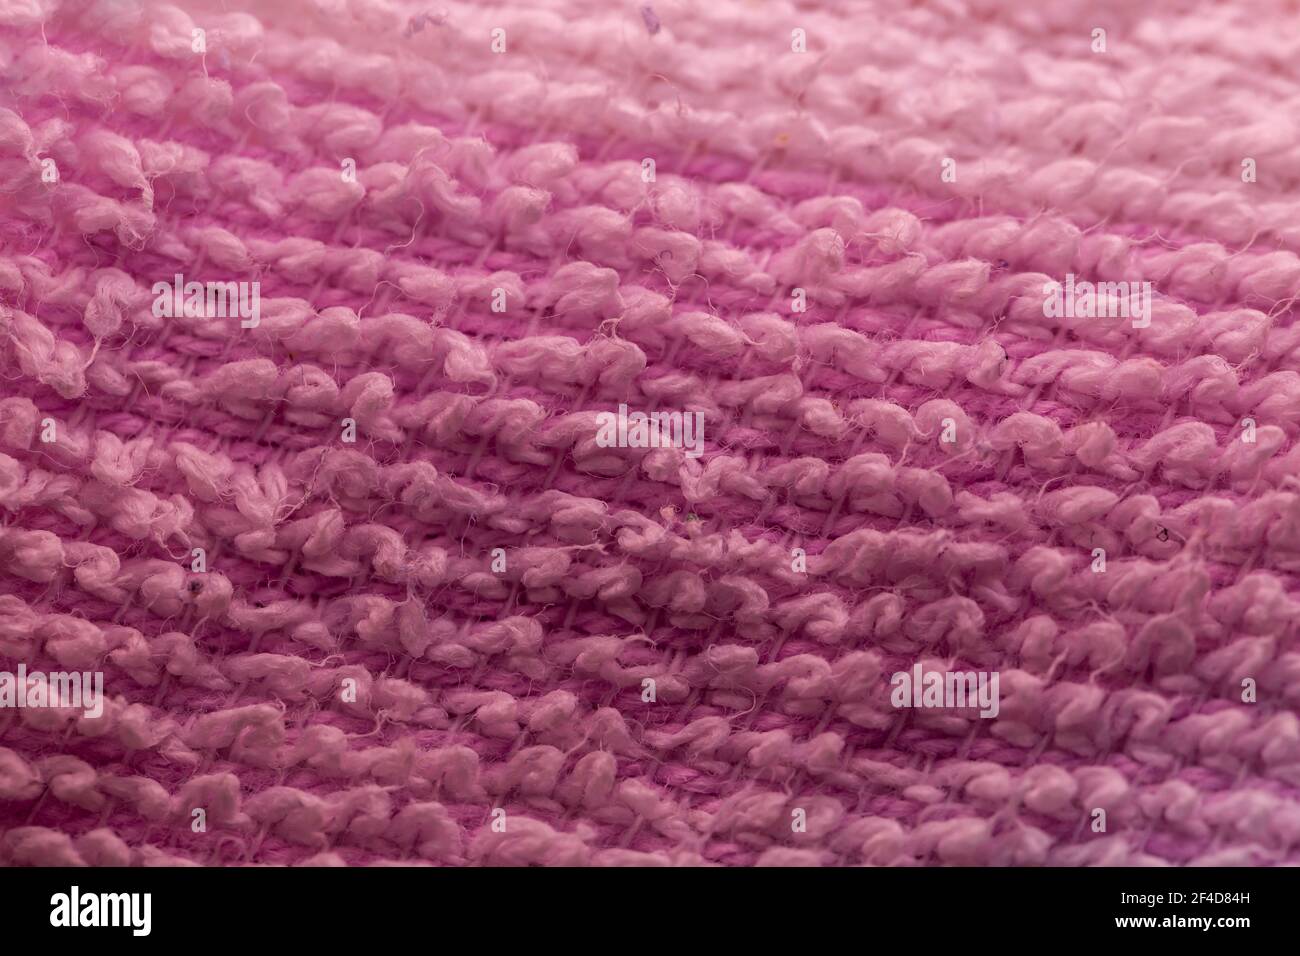 Pink Knitted Synthetic Fabric Background Stock Photo